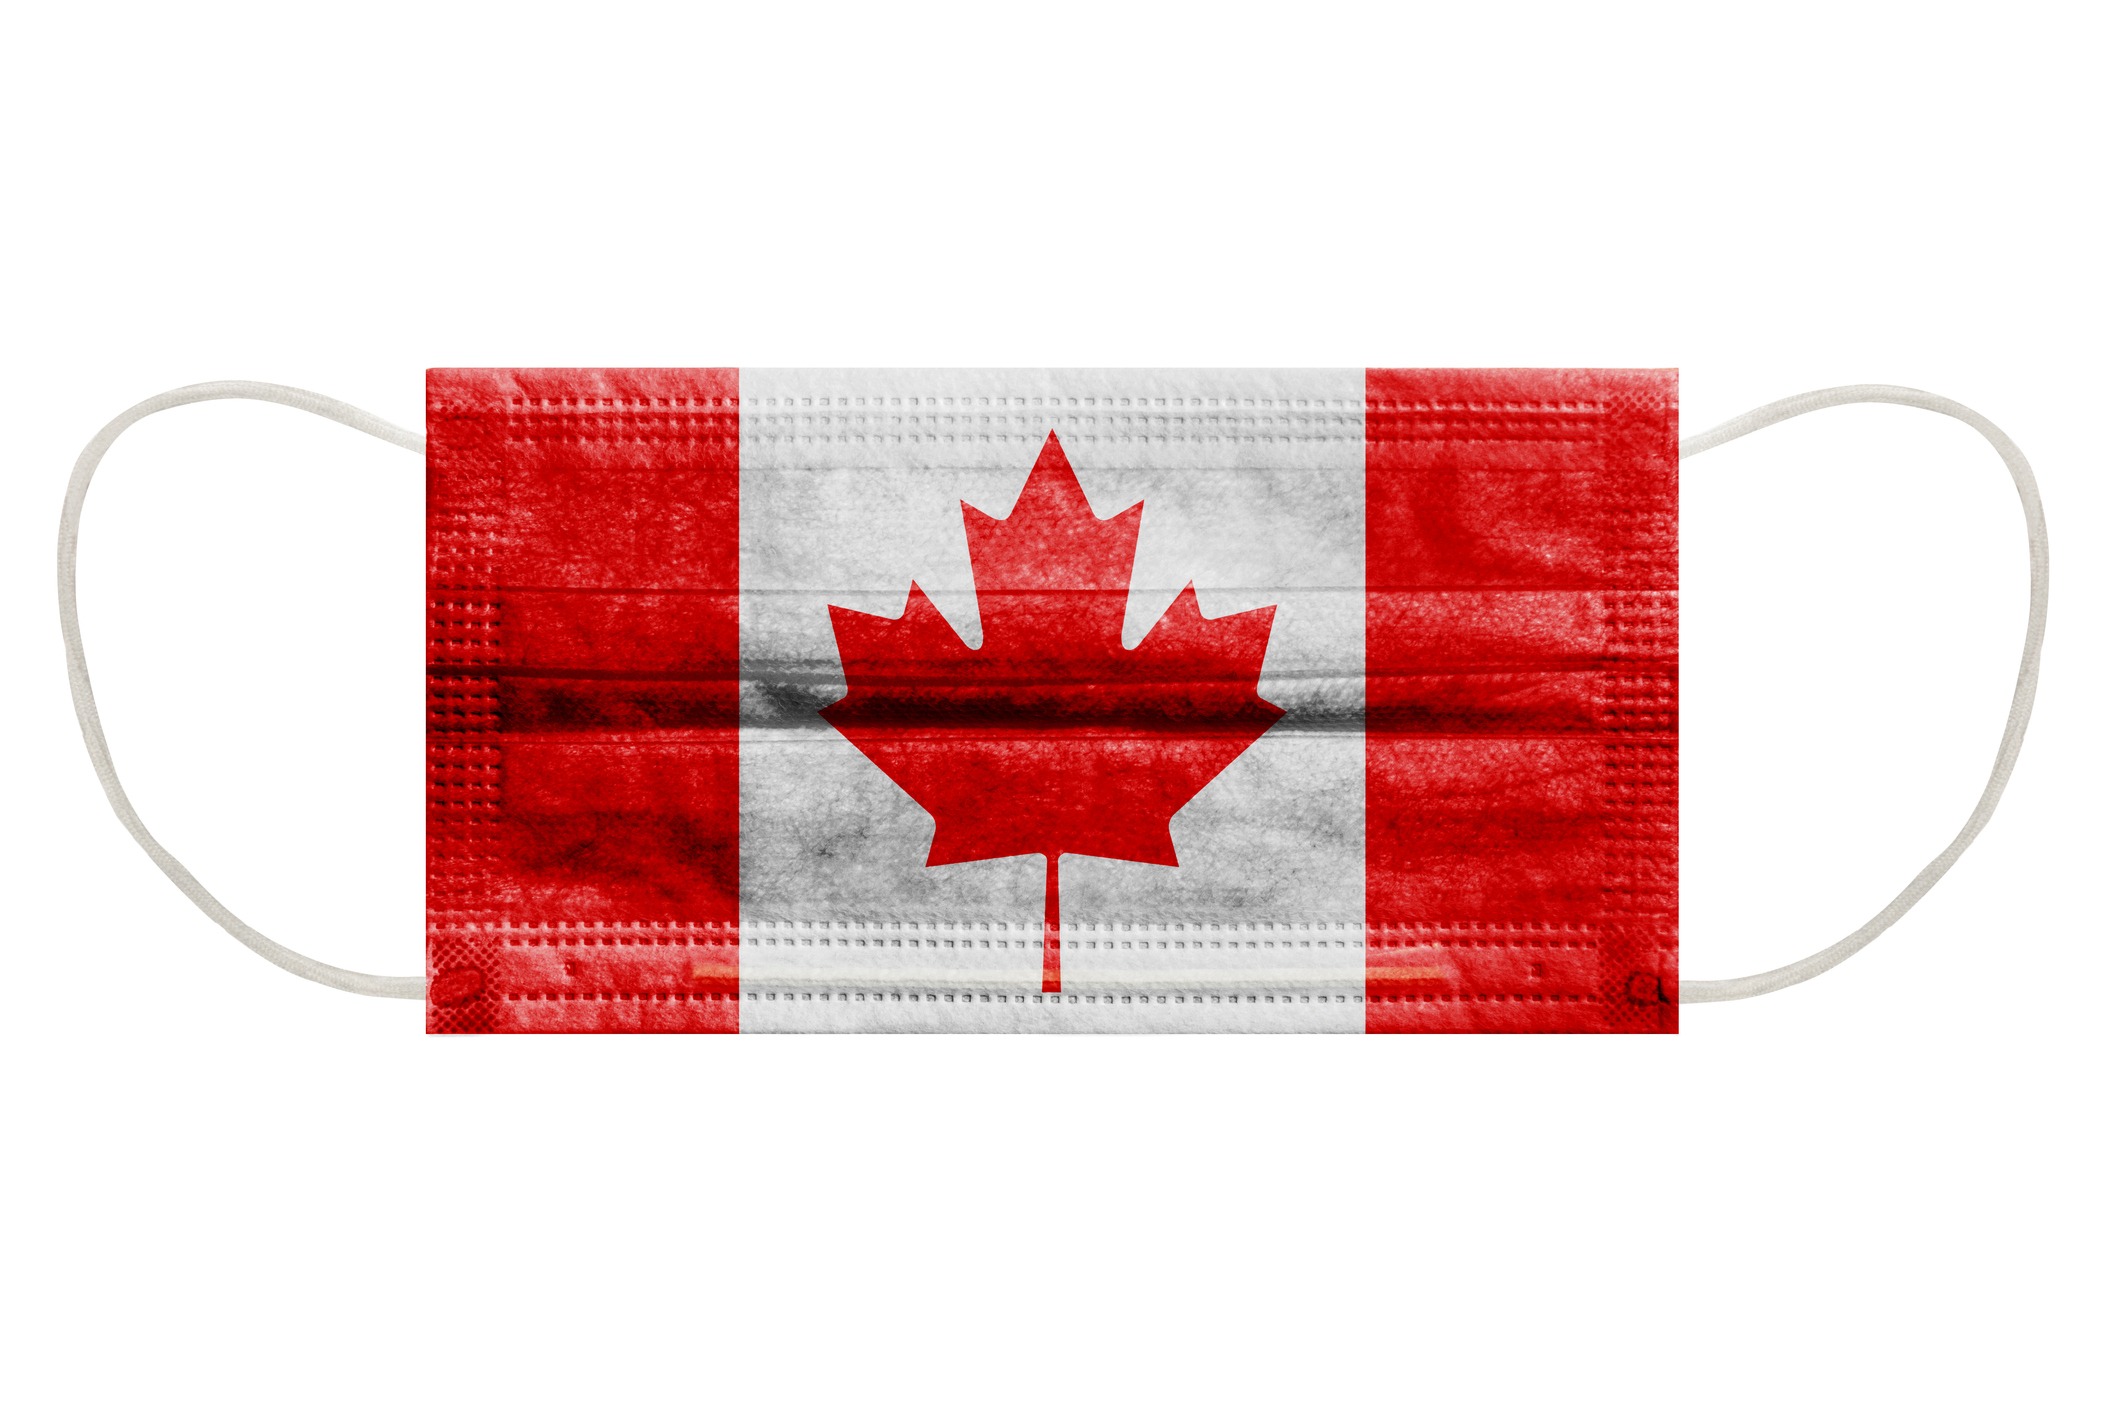 A surgical mask with the Canadian flag printed on it.